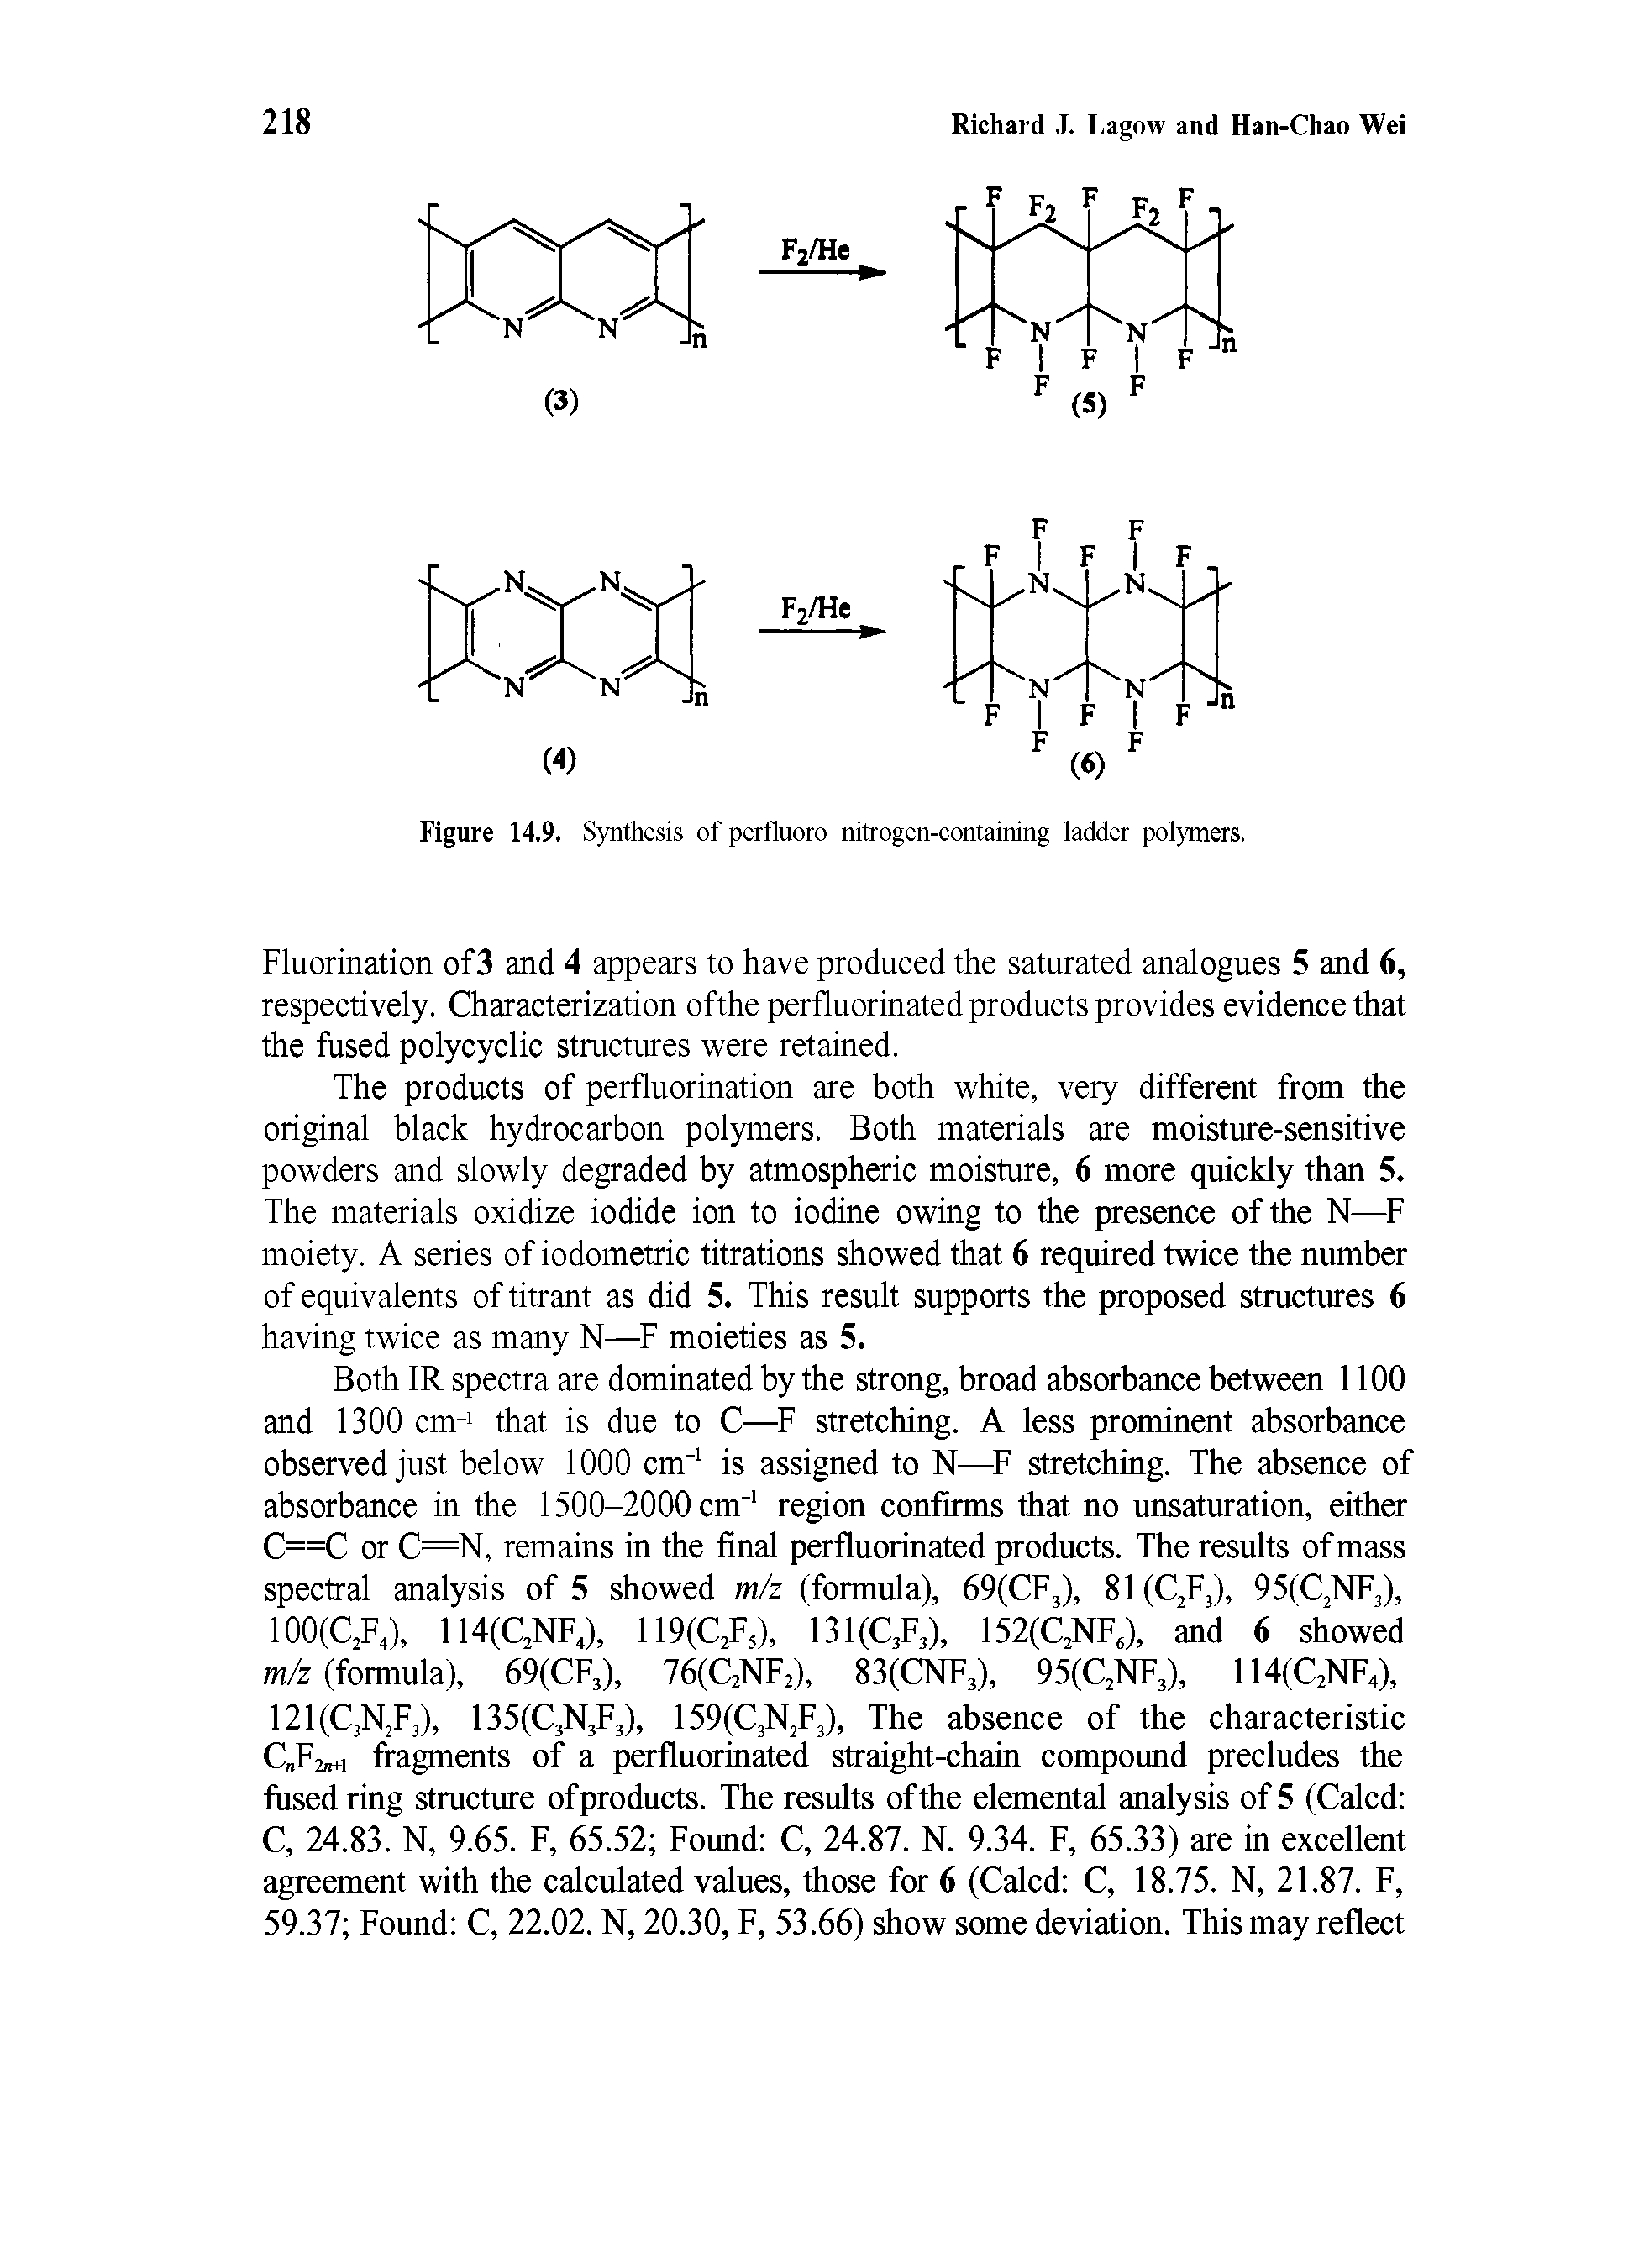 Figure 14.9. Synthesis of perfluoro nitrogen-containing ladder polymers.